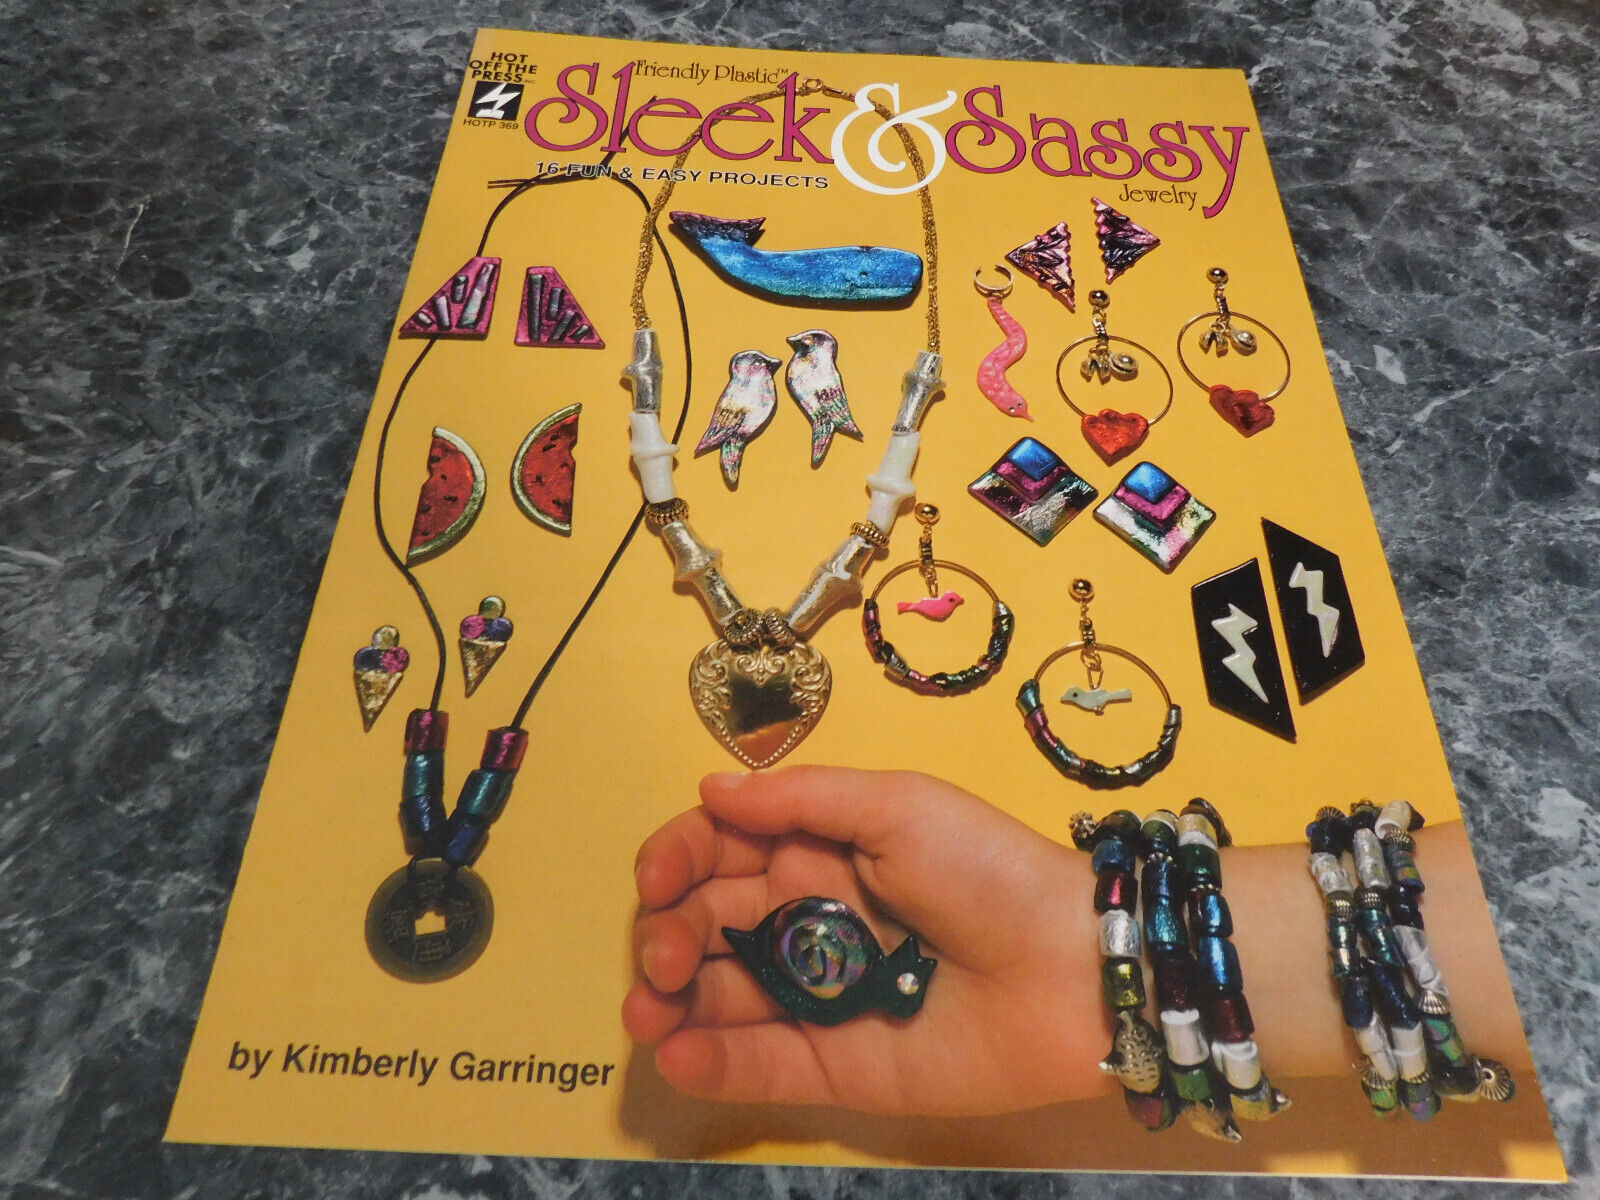 Primary image for Friendly Plastic Steel & Sassy Jewelry by Kimberly Garringer